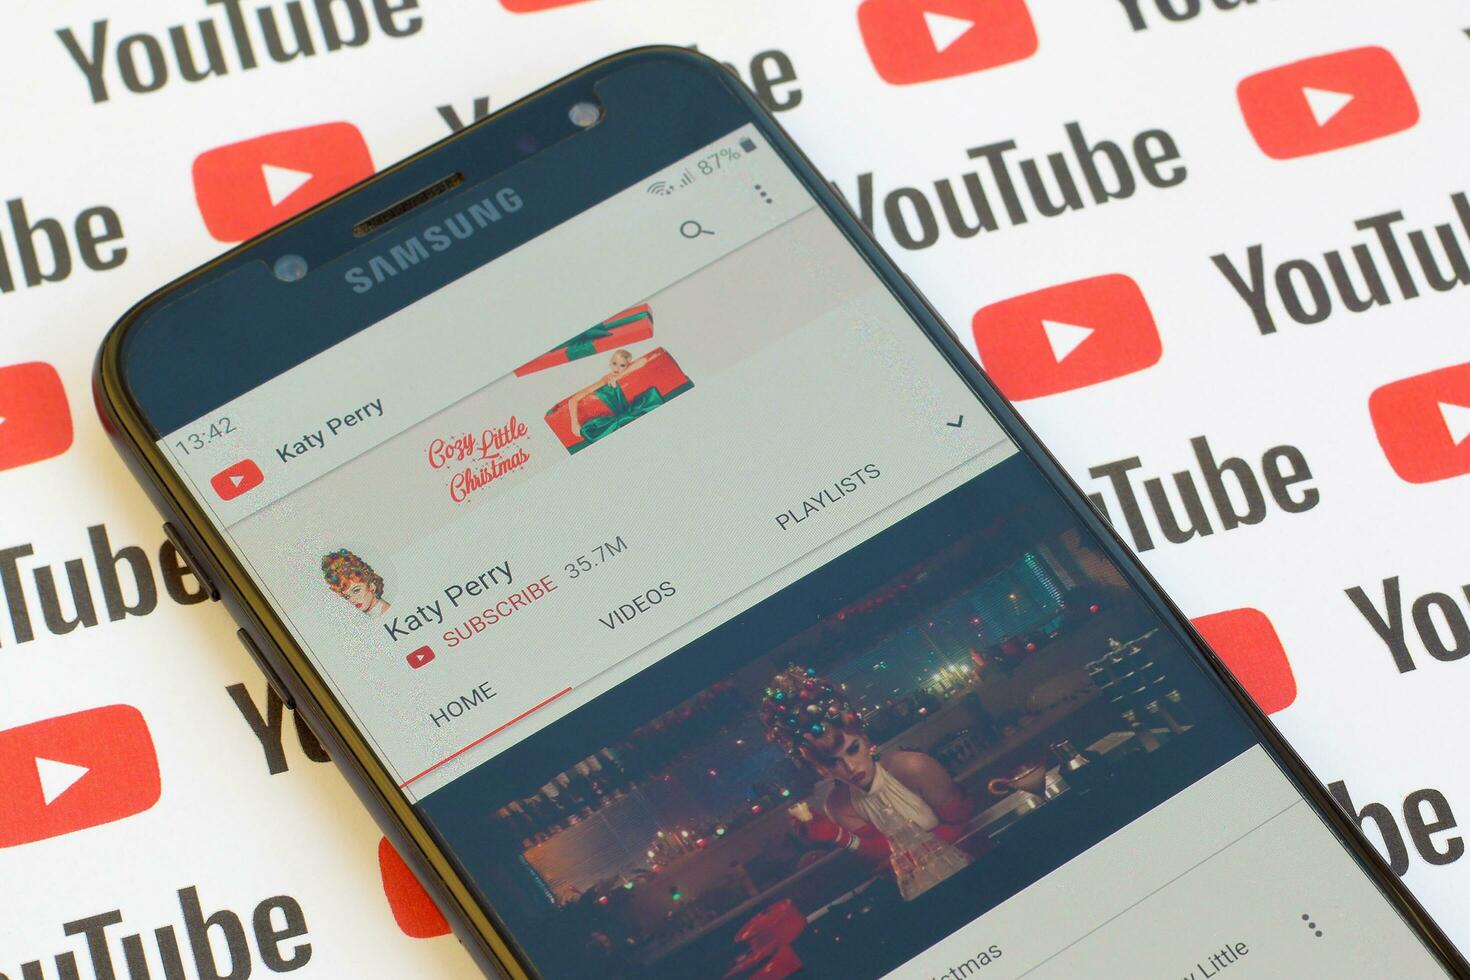 Katy Perry official youtube channel on smartphone screen on paper youtube background. photo